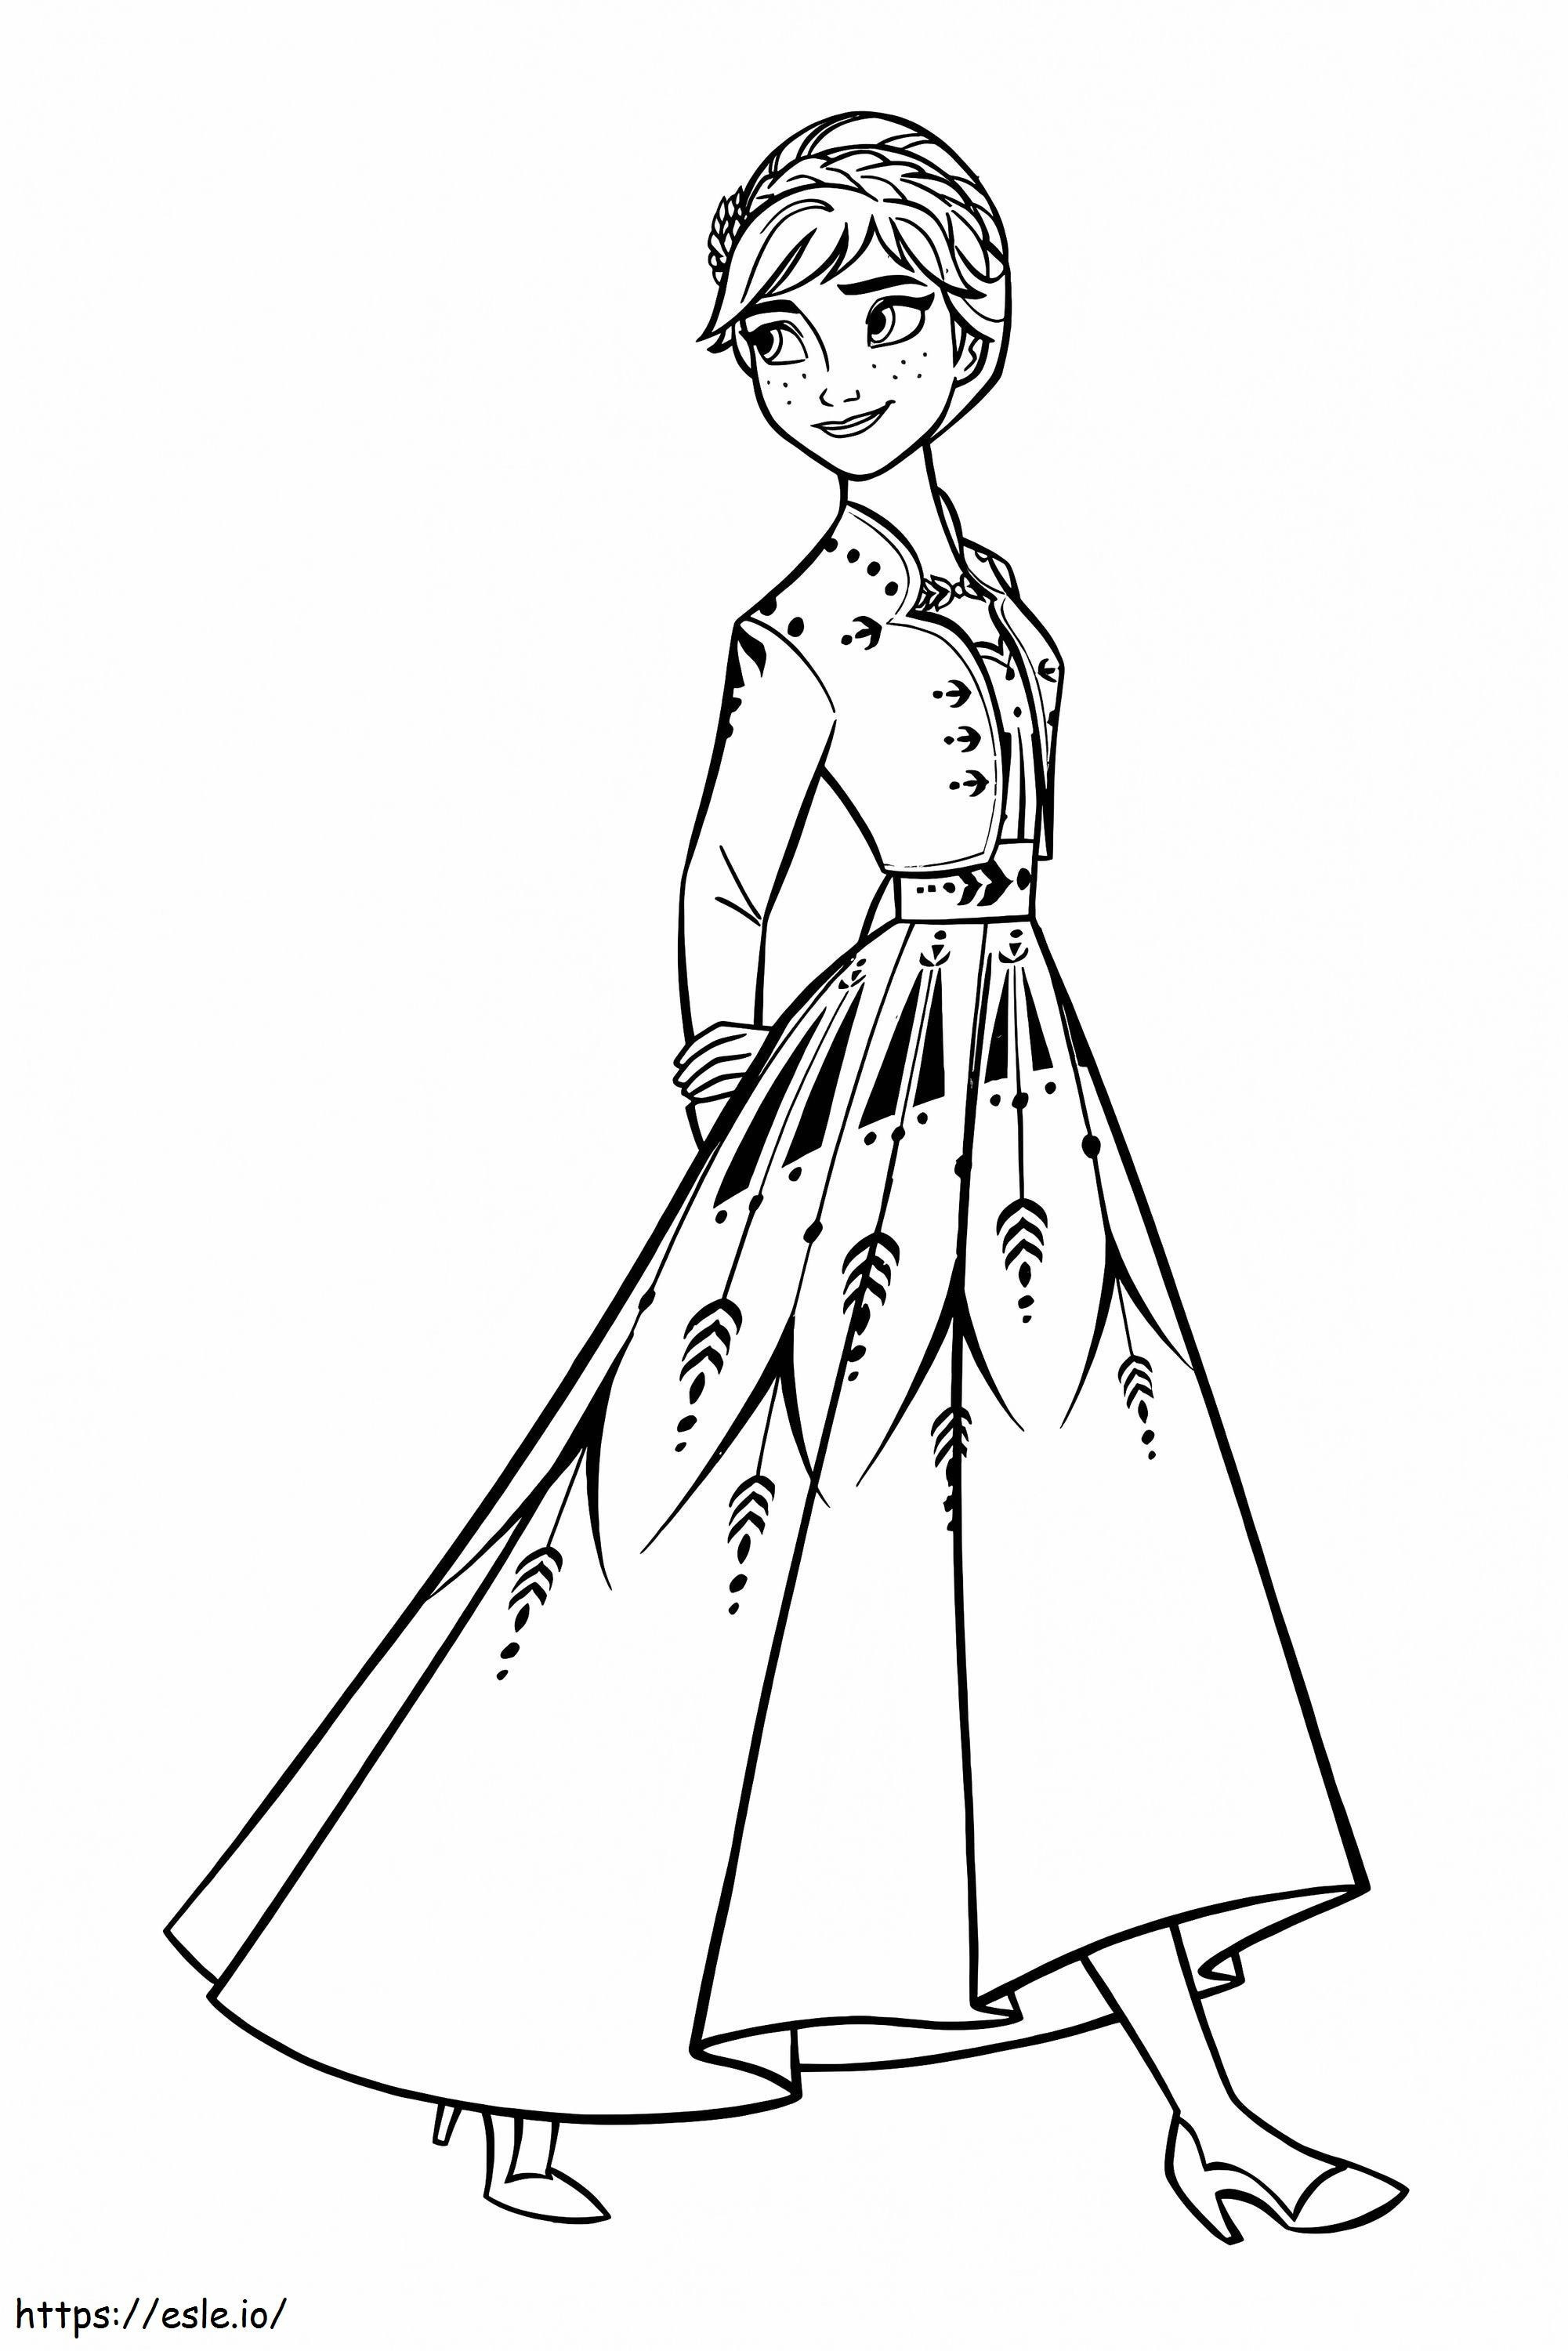 Frozen 2 Anna 1 683X1024 coloring page